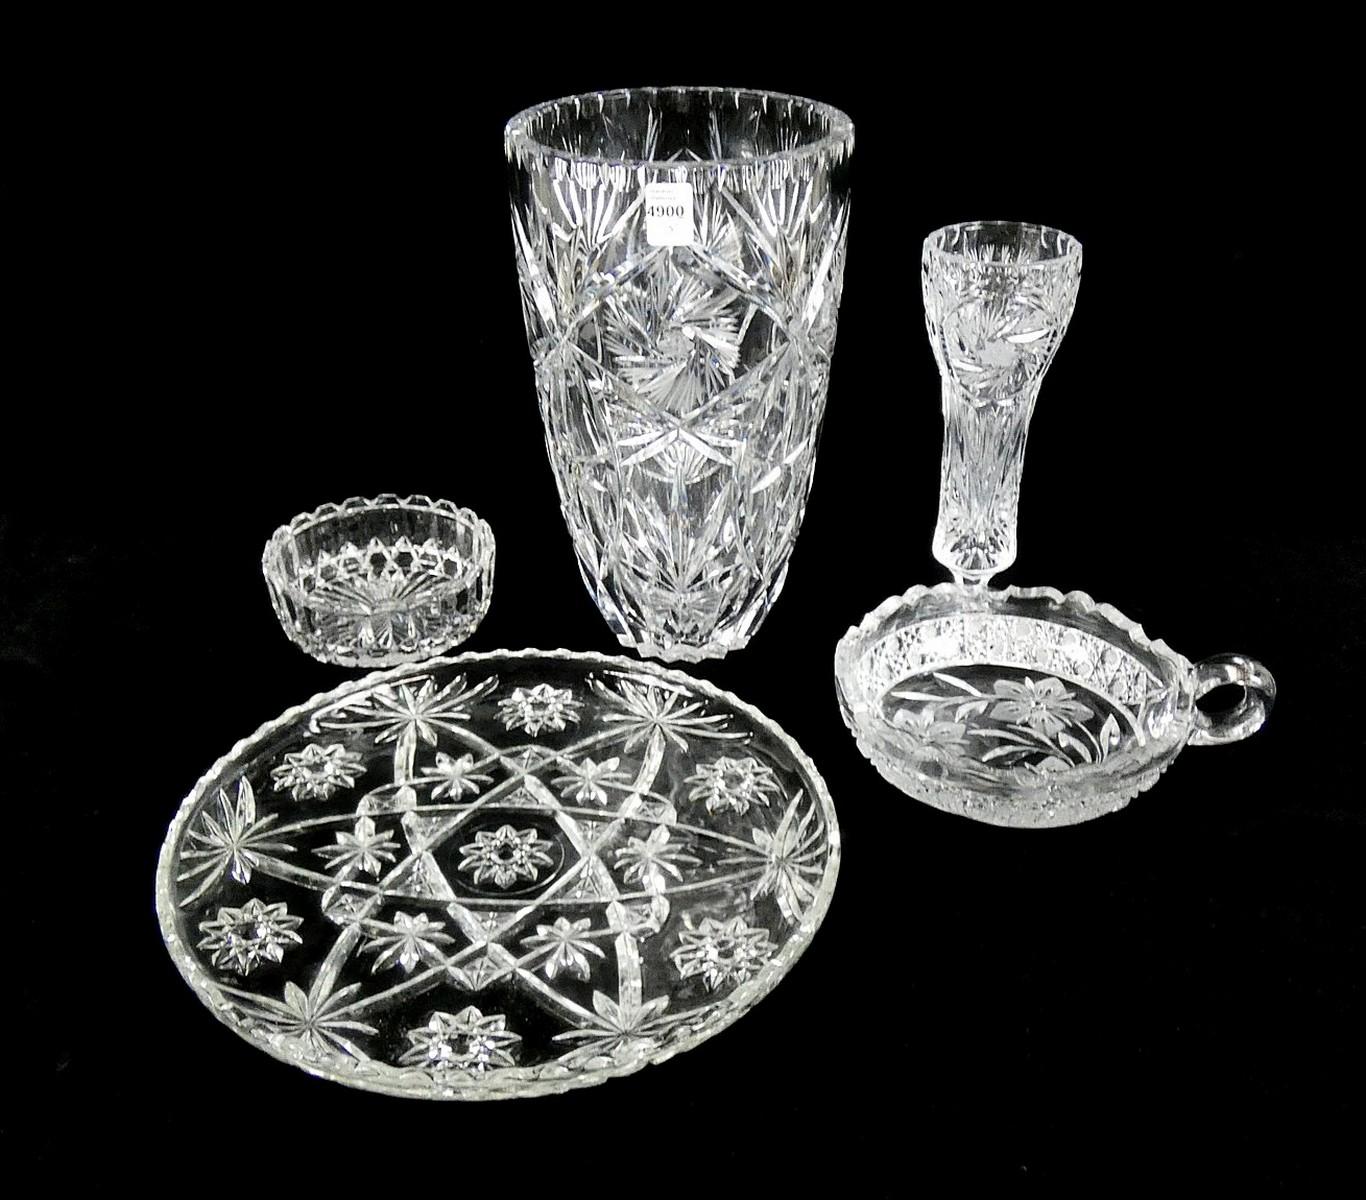 5 PIECES OF CRYSTAL & GLASS